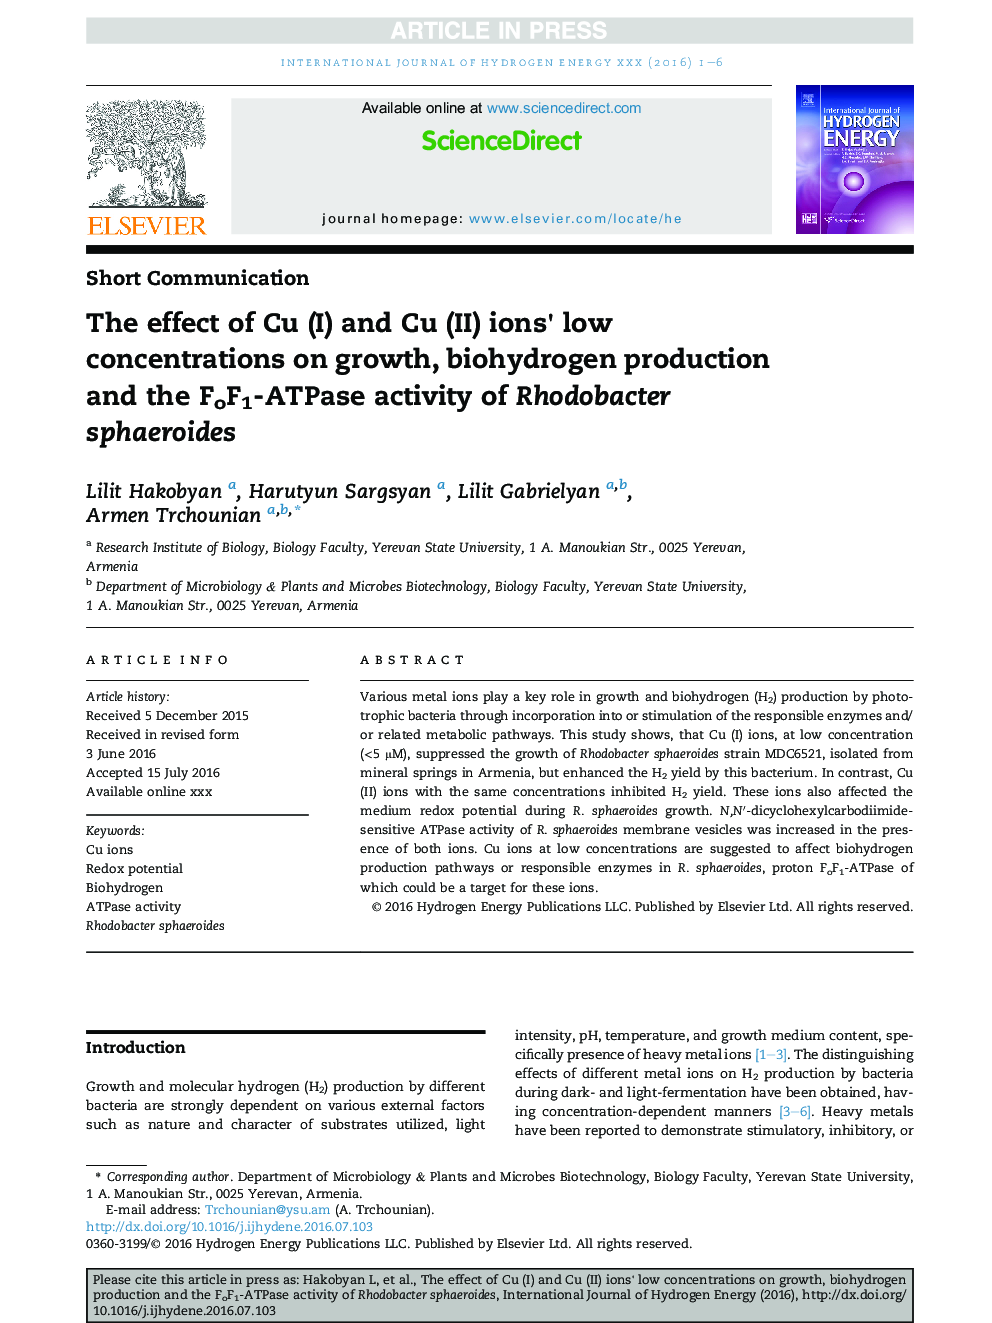 The effect of Cu (I) and Cu (II) ions' low concentrations on growth, biohydrogen production and the FoF1-ATPase activity of Rhodobacter sphaeroides